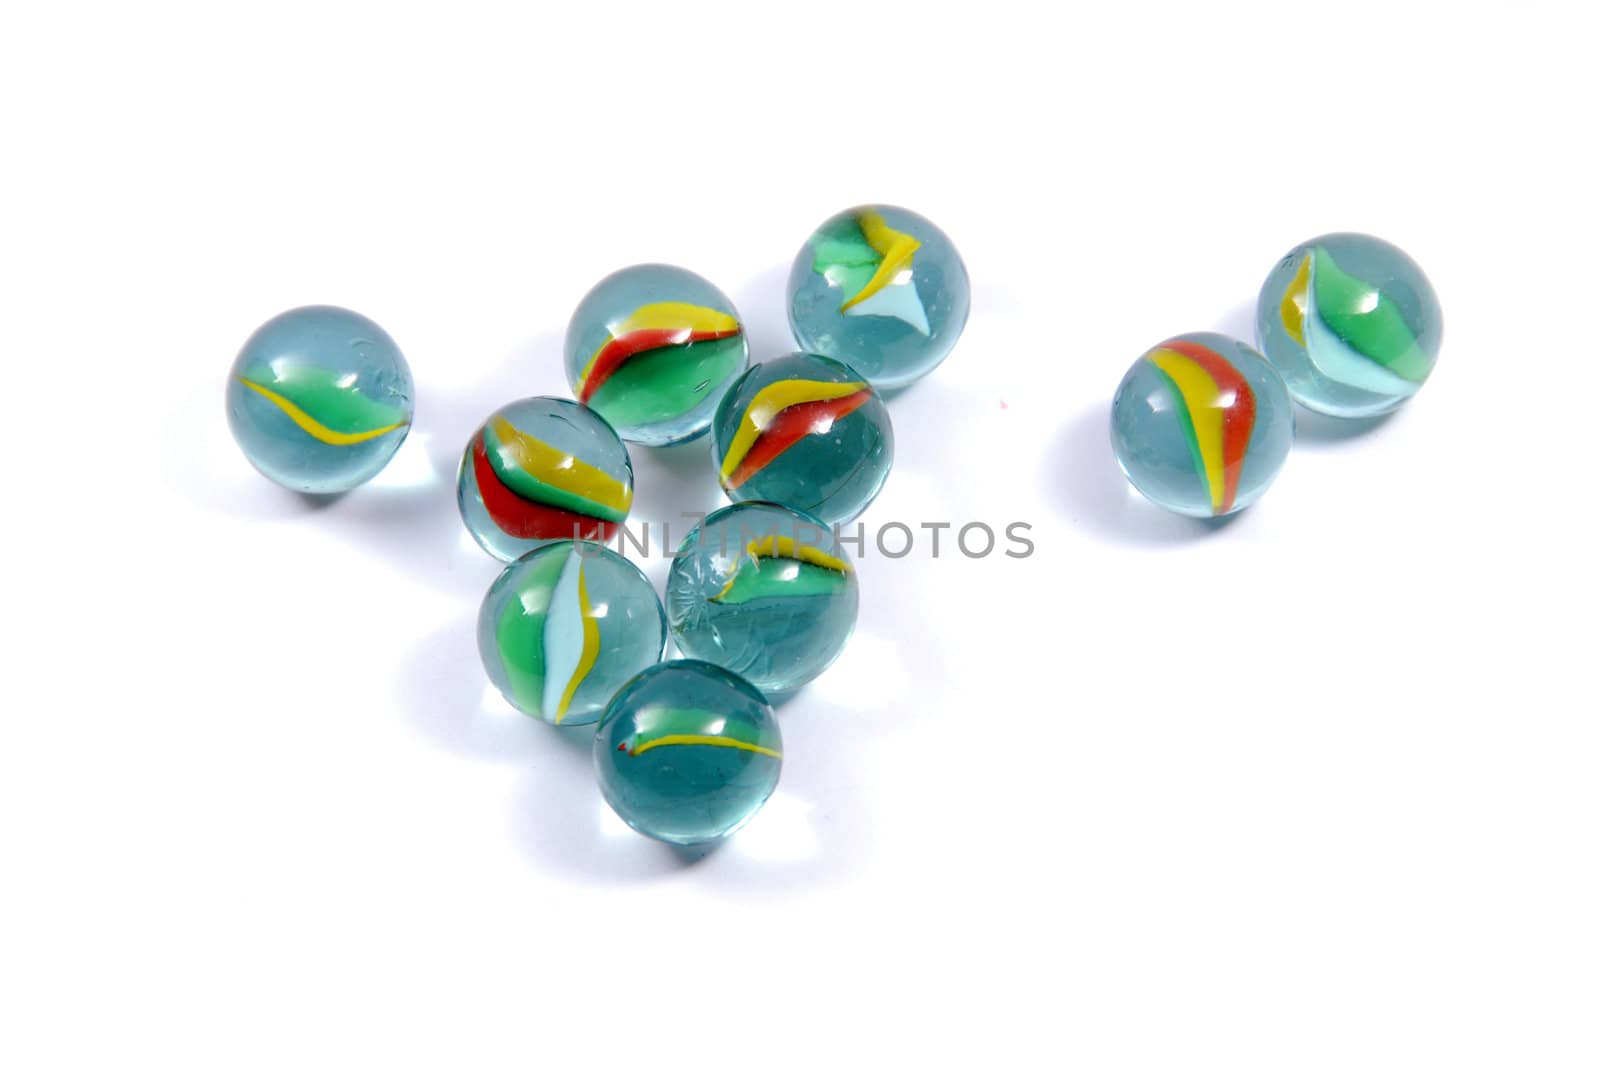 Marbles isolated on white